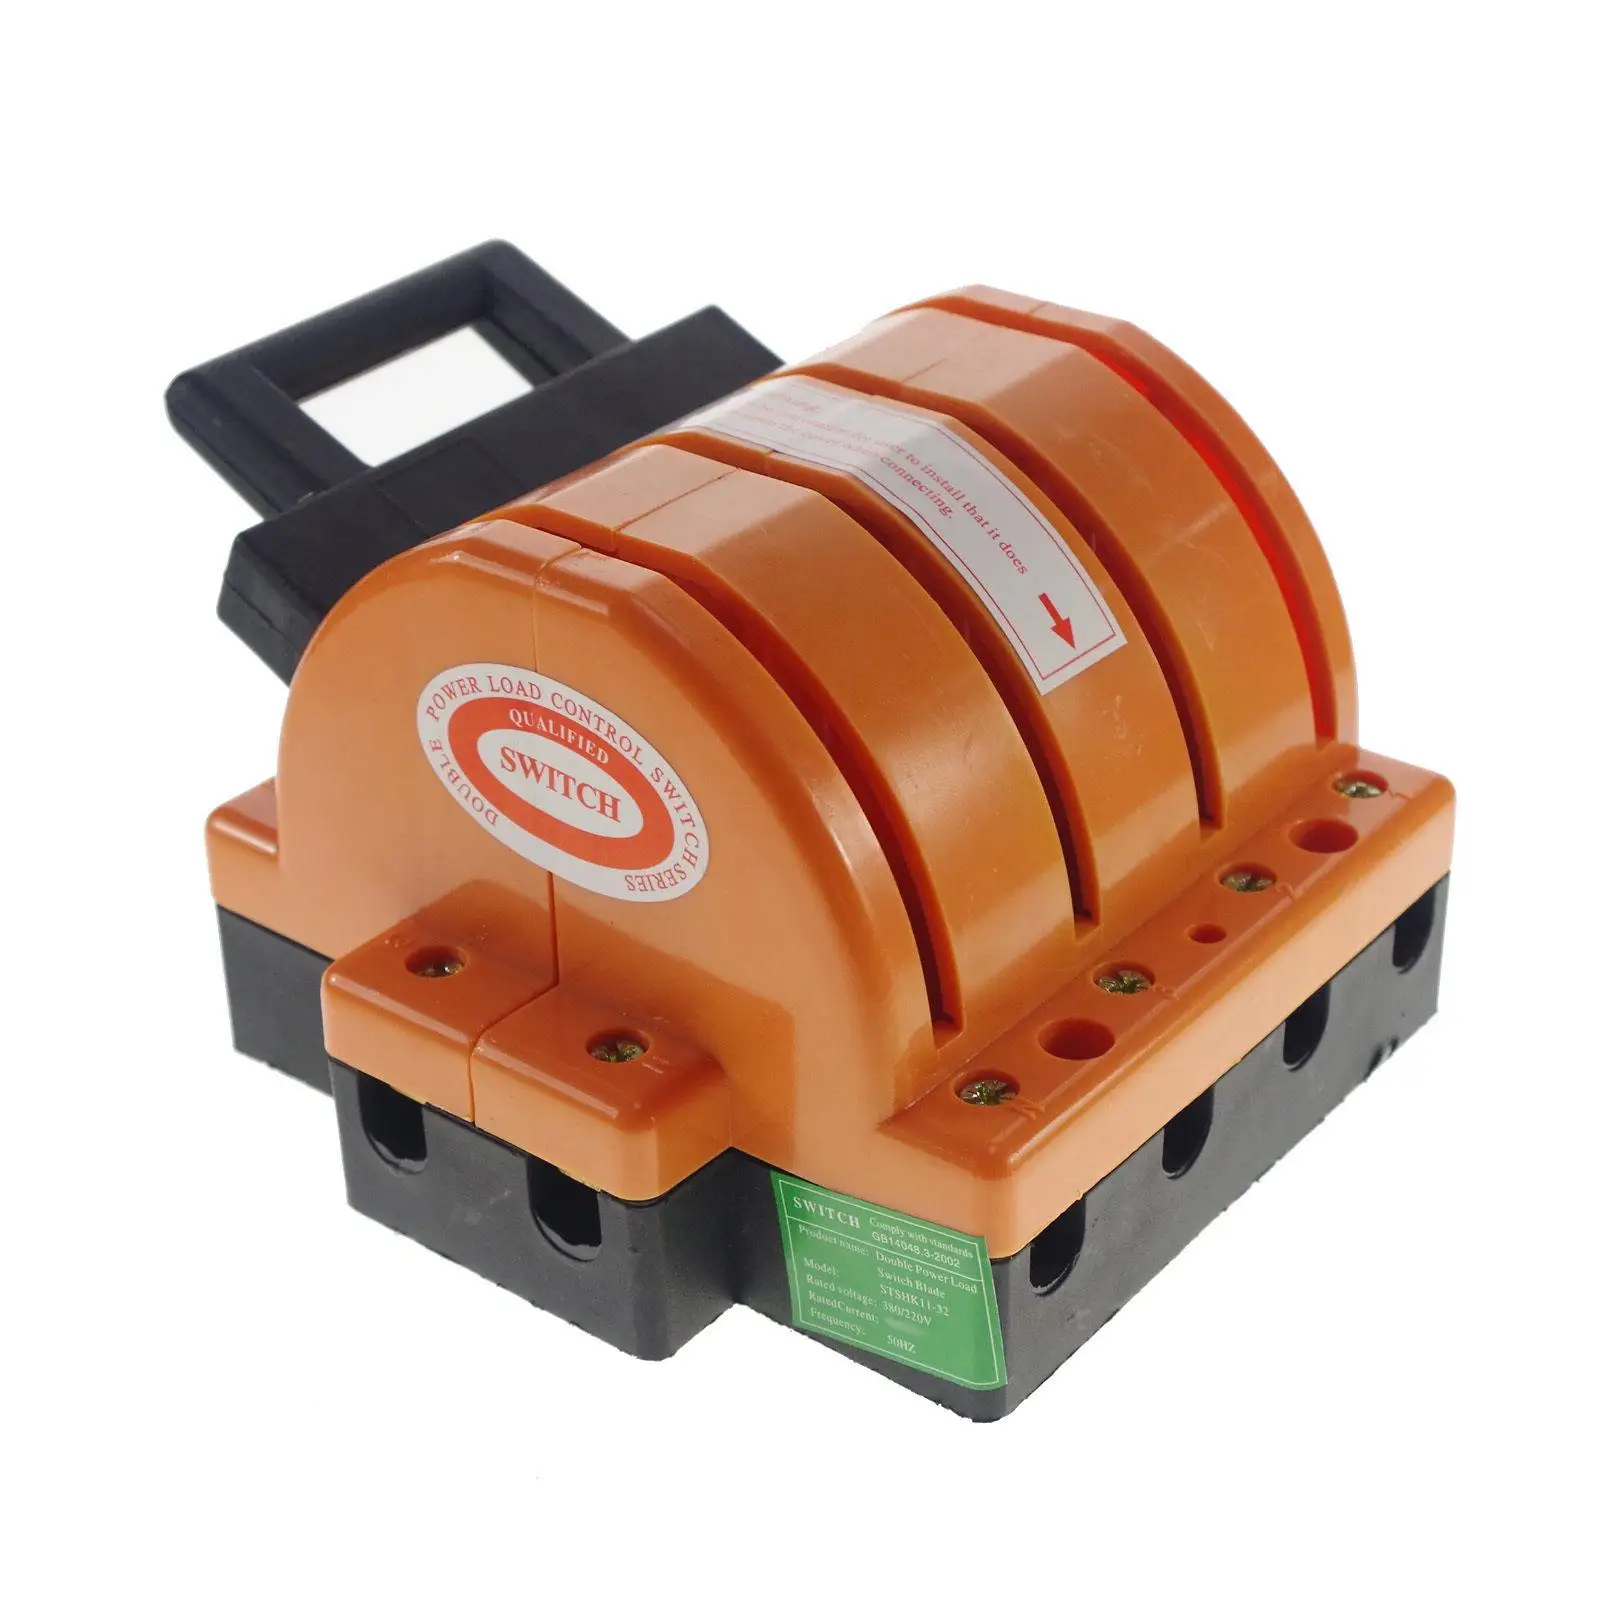 

4 Pole 100A Double 220/380V Throw Knife Disconnect Switch NEW Plastic Refractory Power Source Transfer